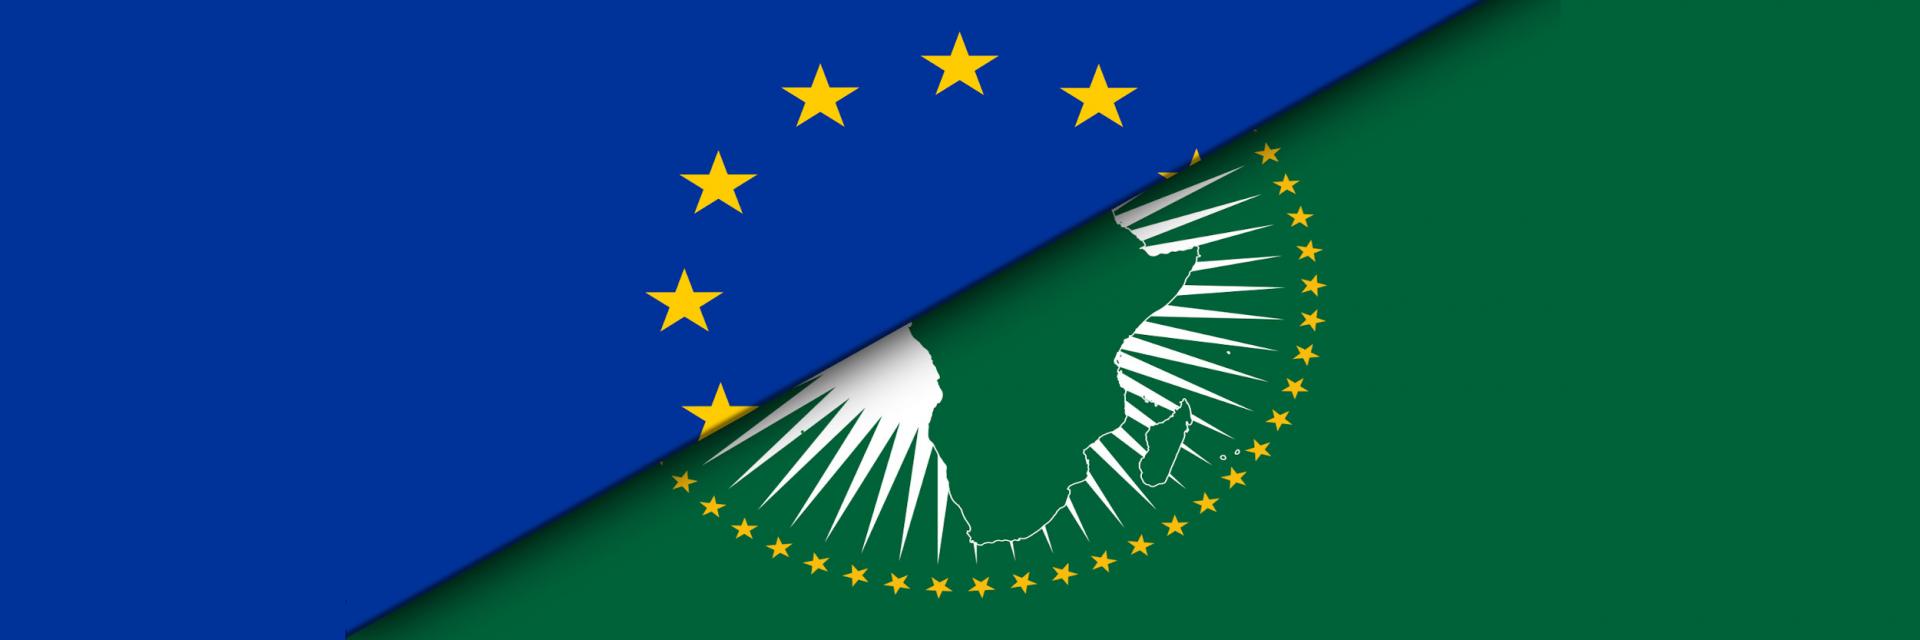 European Union, at ECA webinar, pledges stronger financial and political support for the African Continental Free Trade Area (AfCFTA)